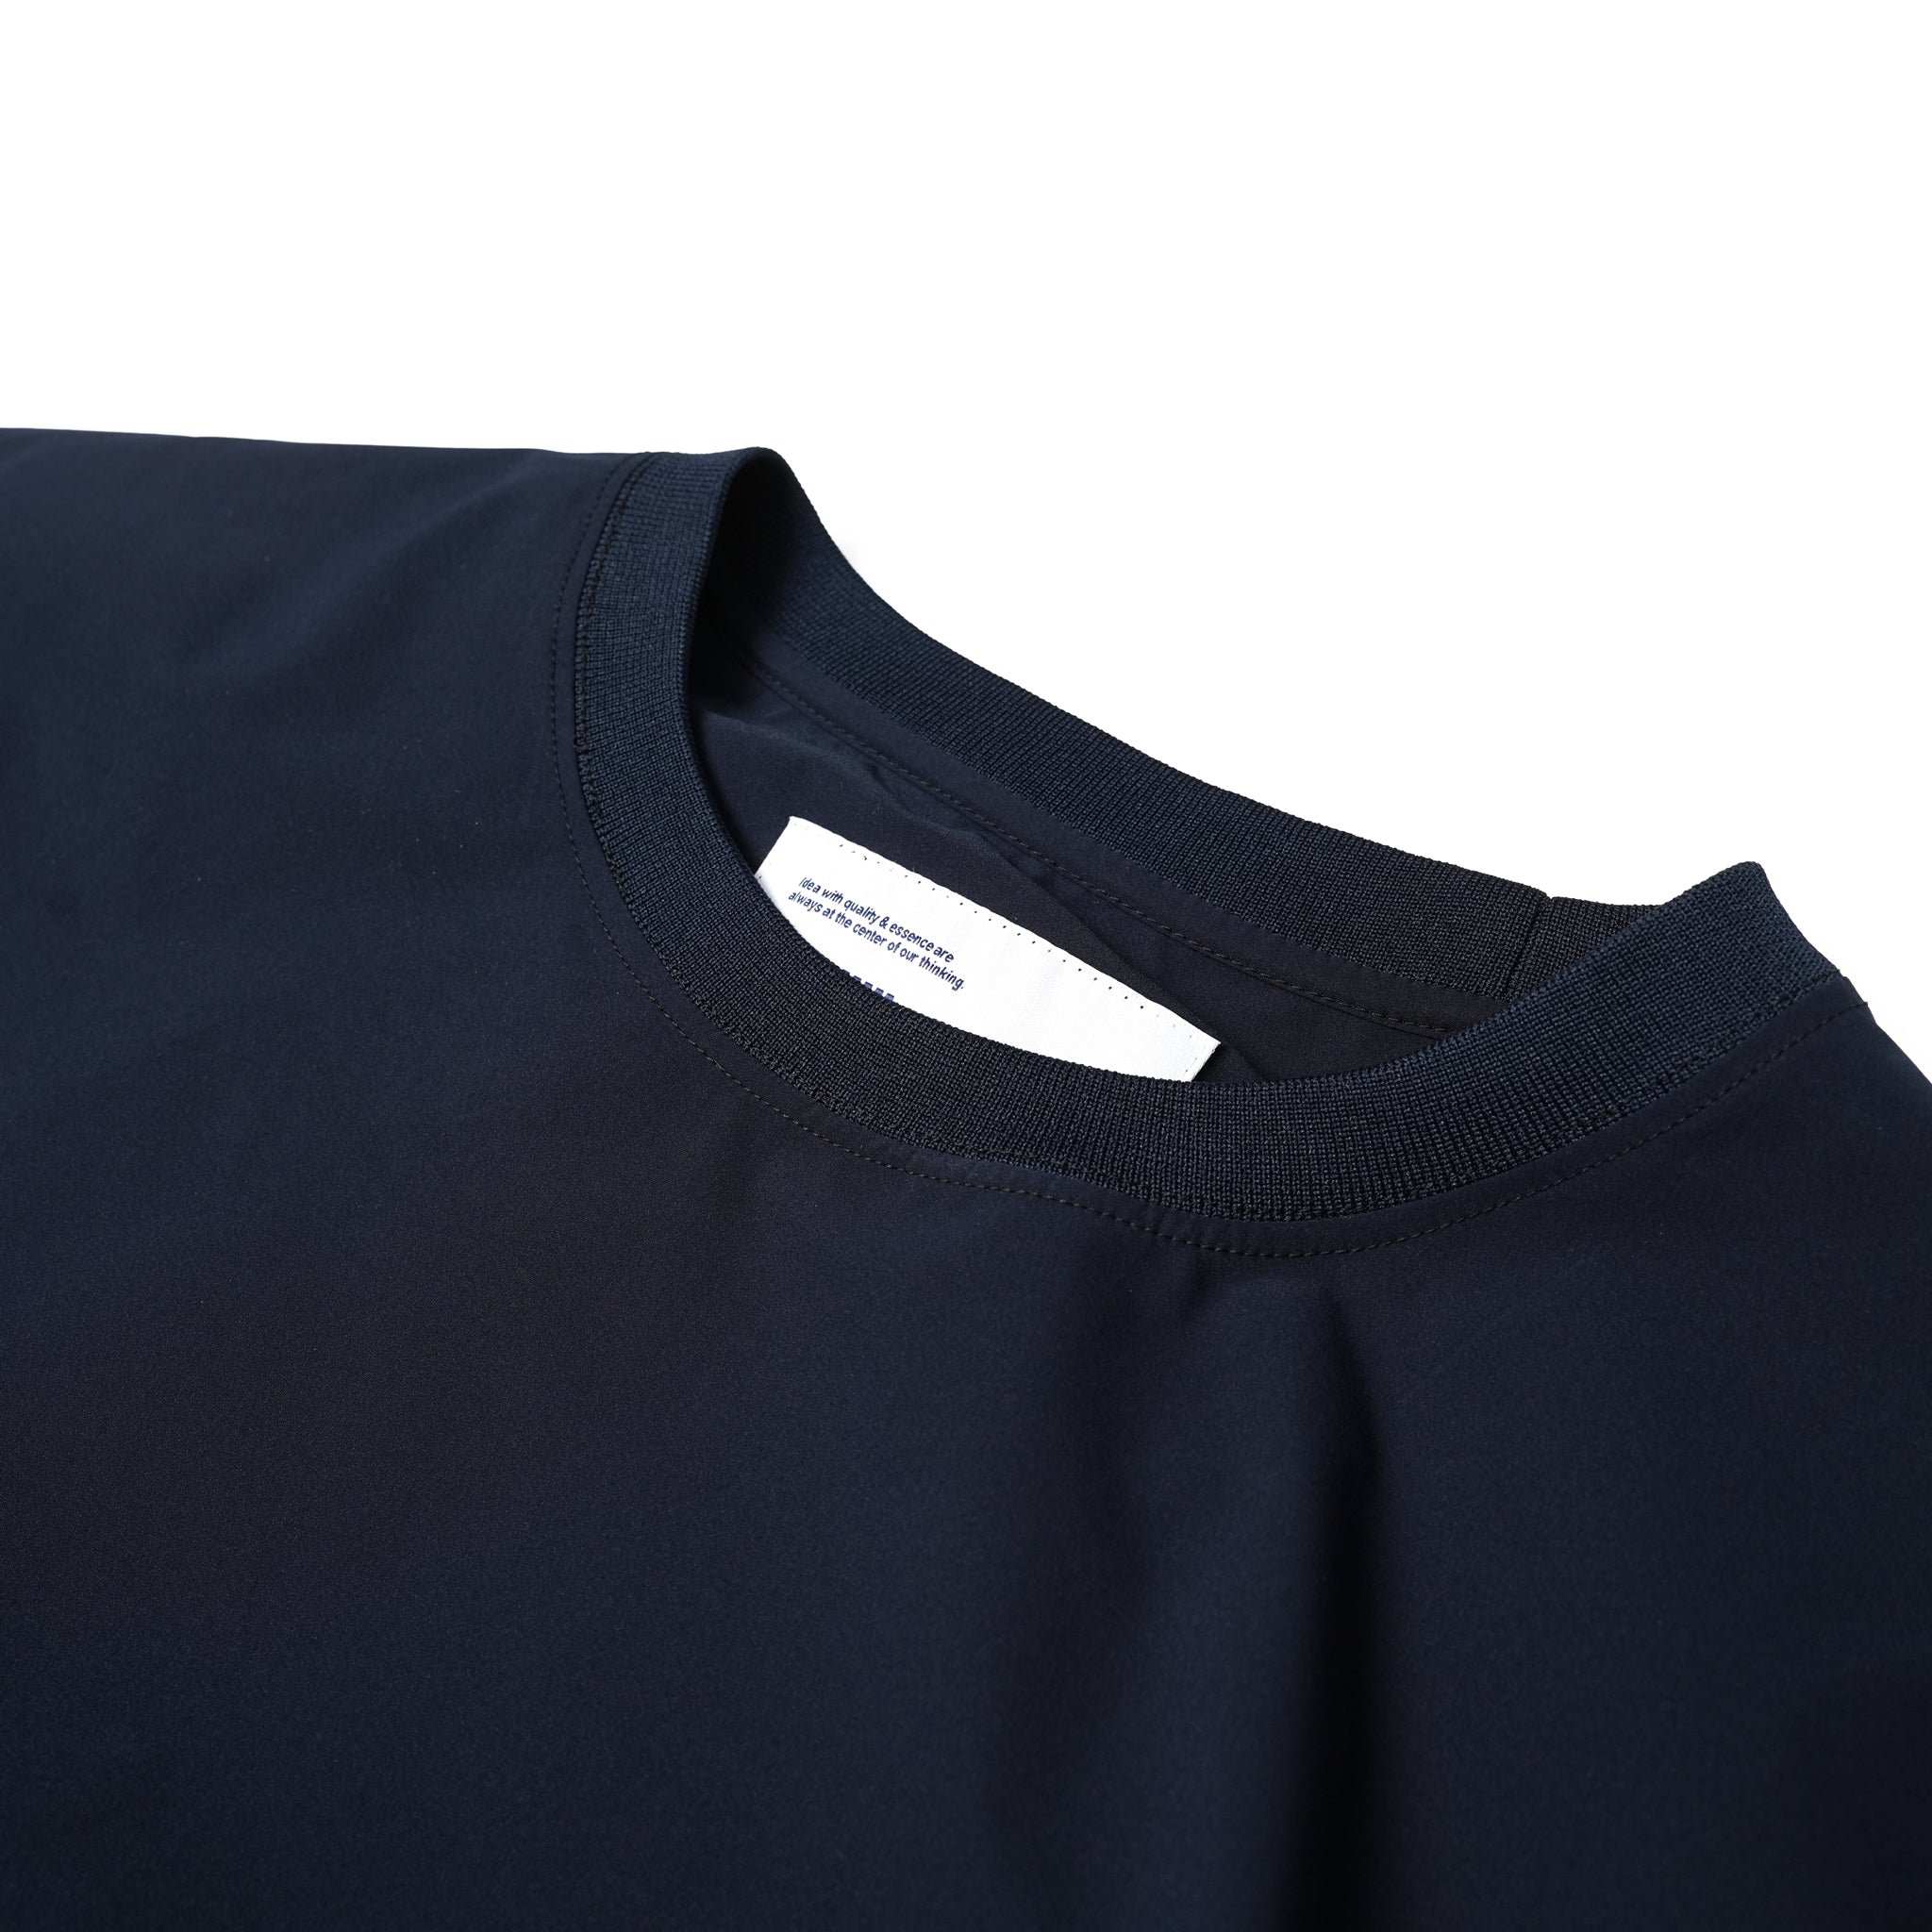 No:UN-016_SS24 | Name:WATER REPELLENT 2W STRETCH SMOCK S/S | Color:Dark Navy【UNTRACE_アントレース】